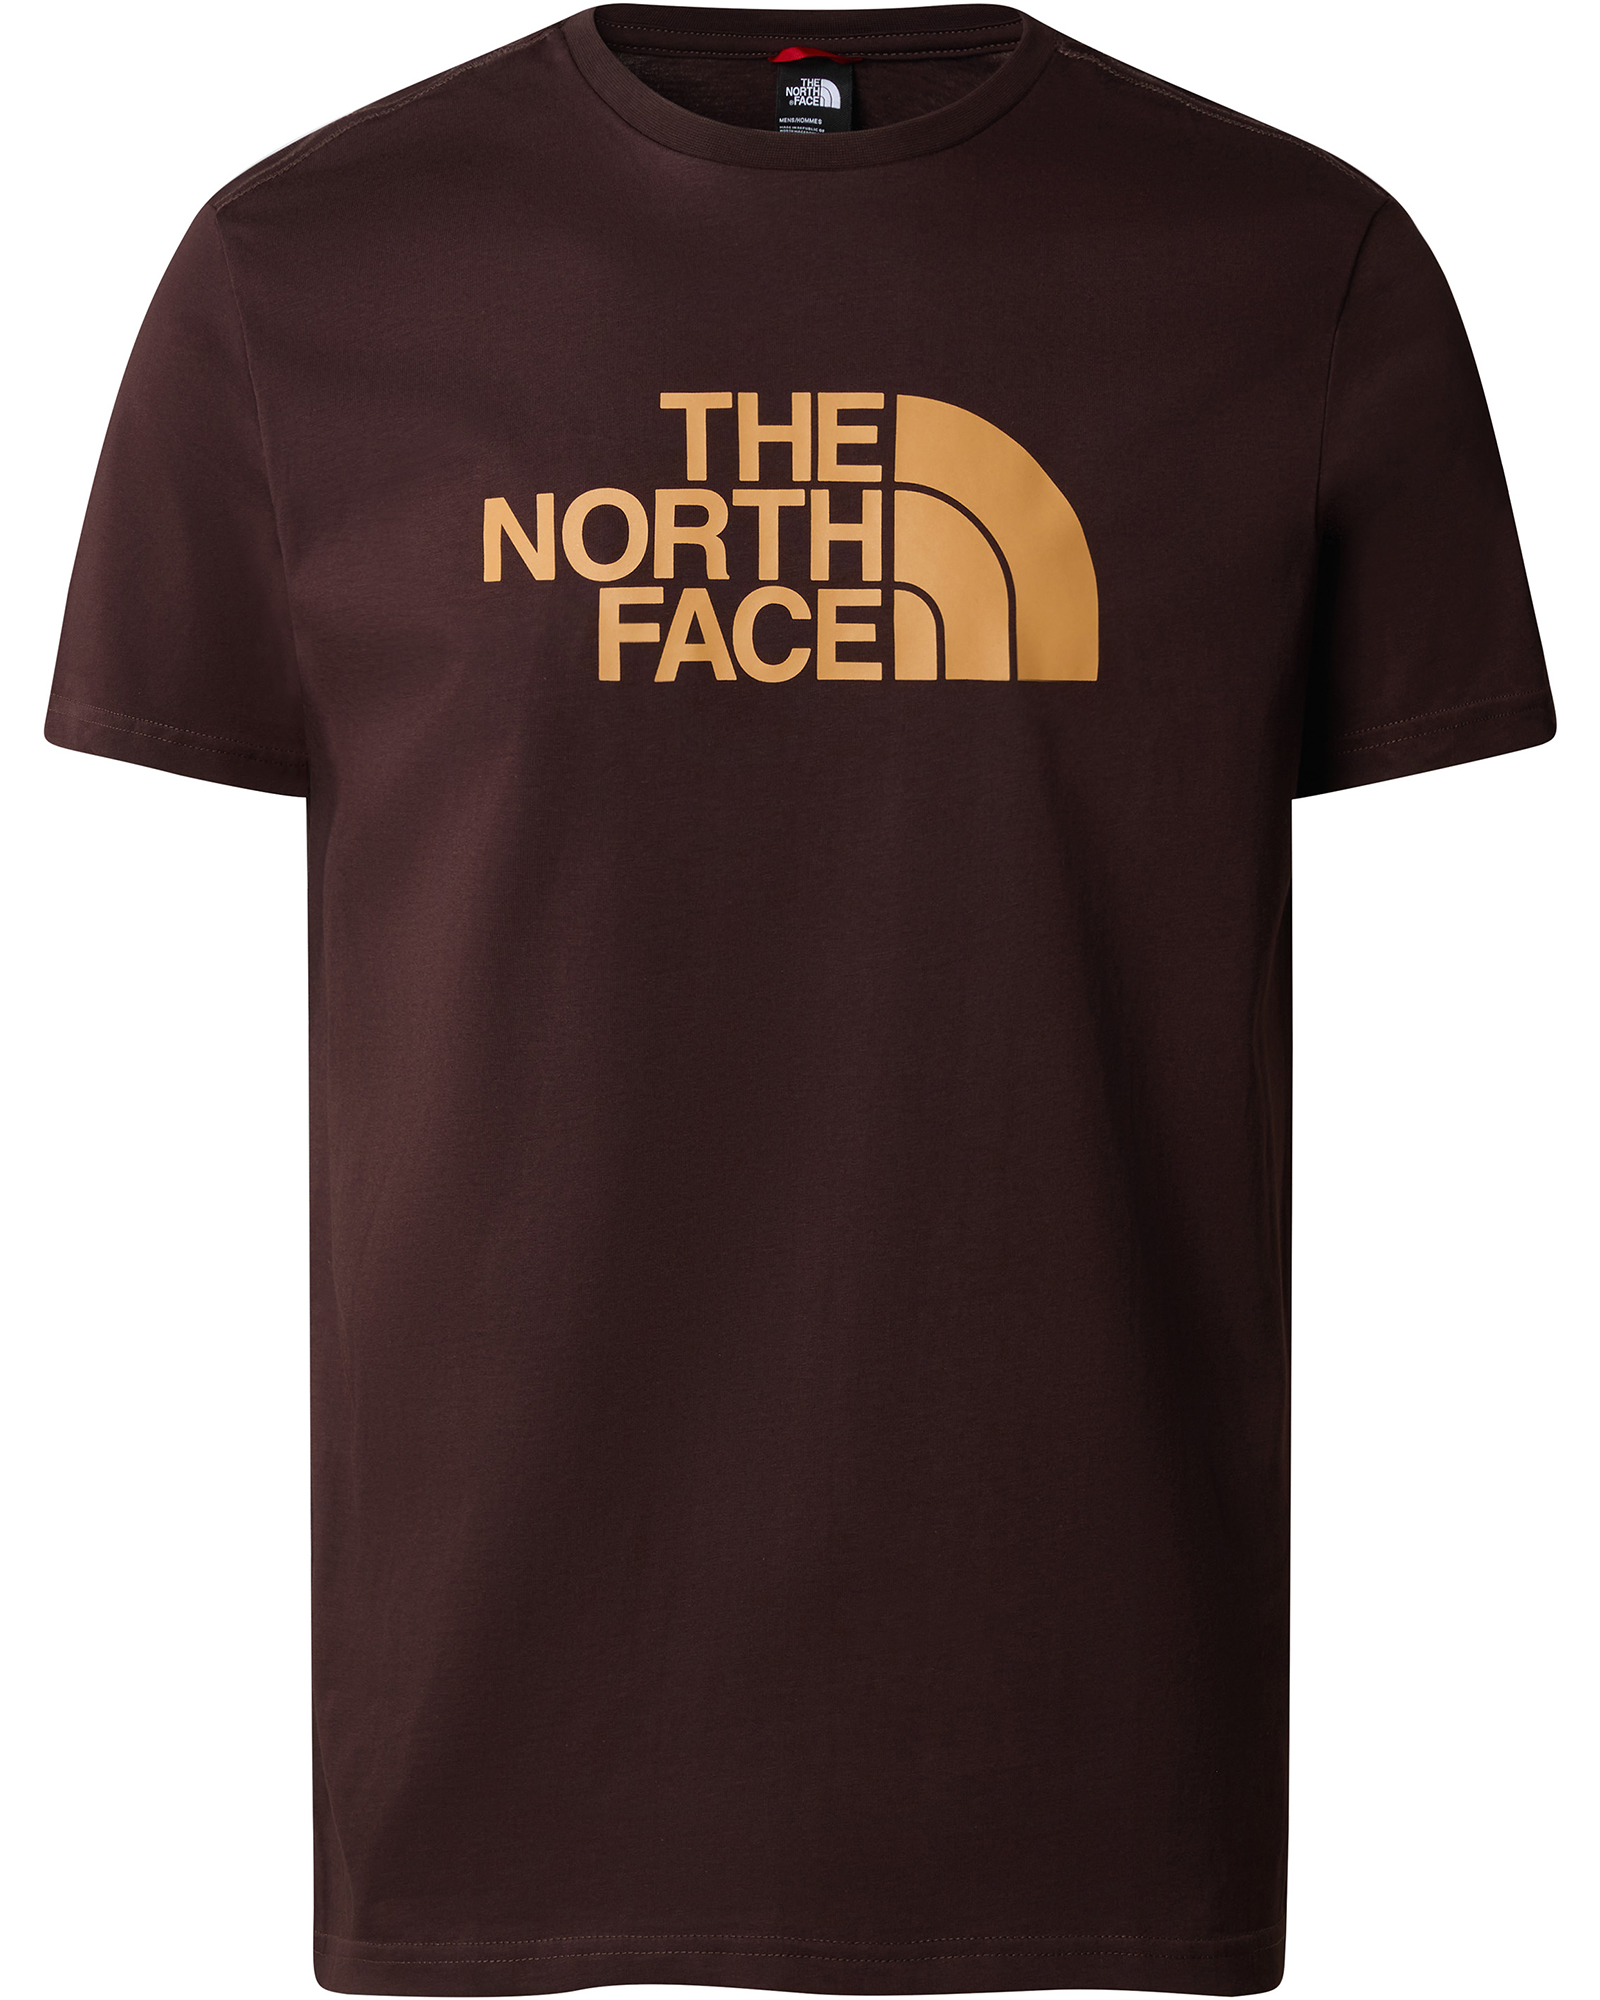 The North Face Easy Men’s T Shirt - Coal Brown-Almond Butter M